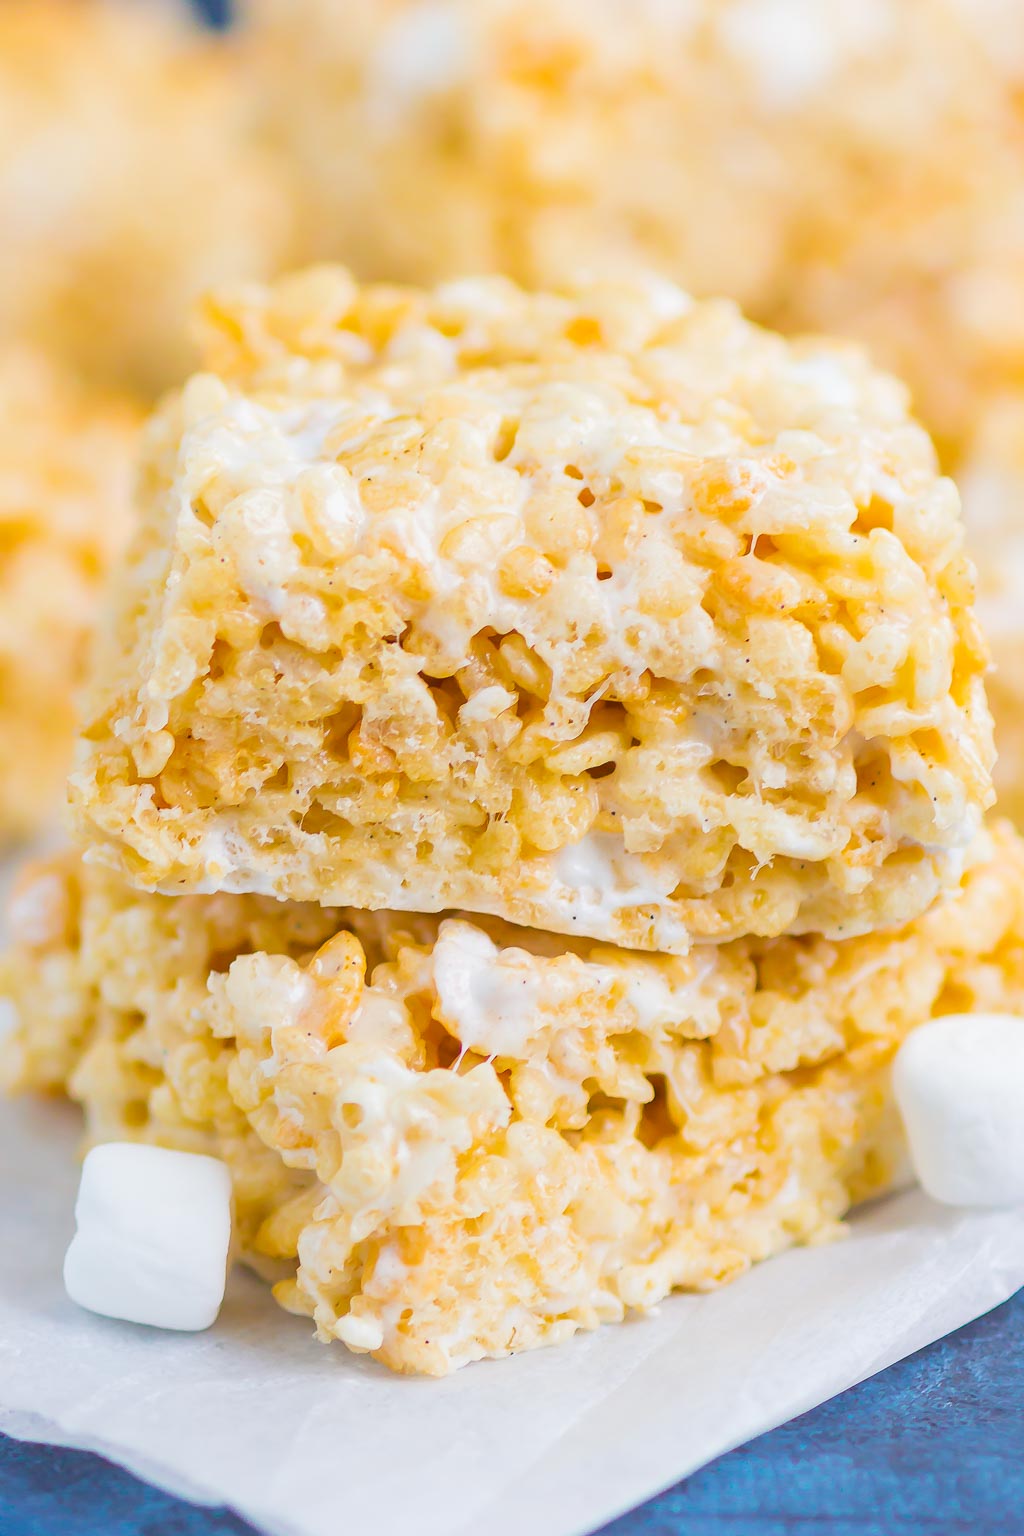 Rice Krispie Treats are soft, chewy, and loaded with pockets of sweet marshmallows. Made with just a few ingredients and ready in no time, this classic dessert will be a hit with everyone! #ricekrispietreats #bestricekrispietreats #ricekrispies #ricekrispie #marshmallowdessert #marshmallows #nobake